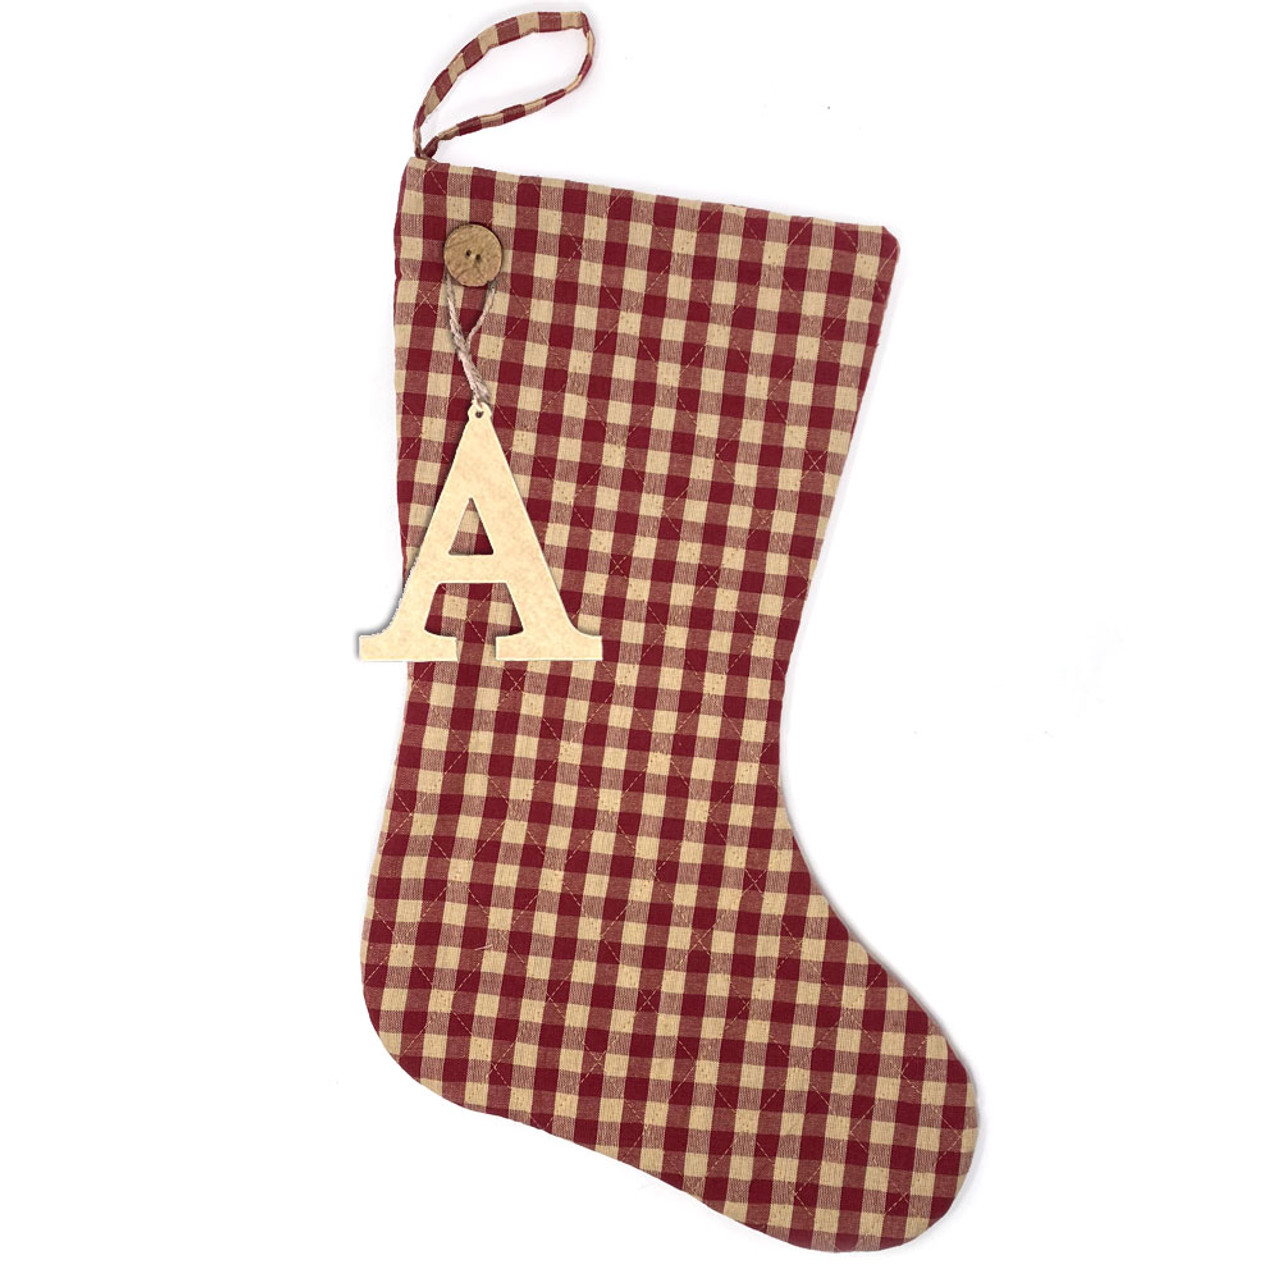 Primitive Red 5 Quilted Stocking with Personalized Letter Charm by Marilee Home